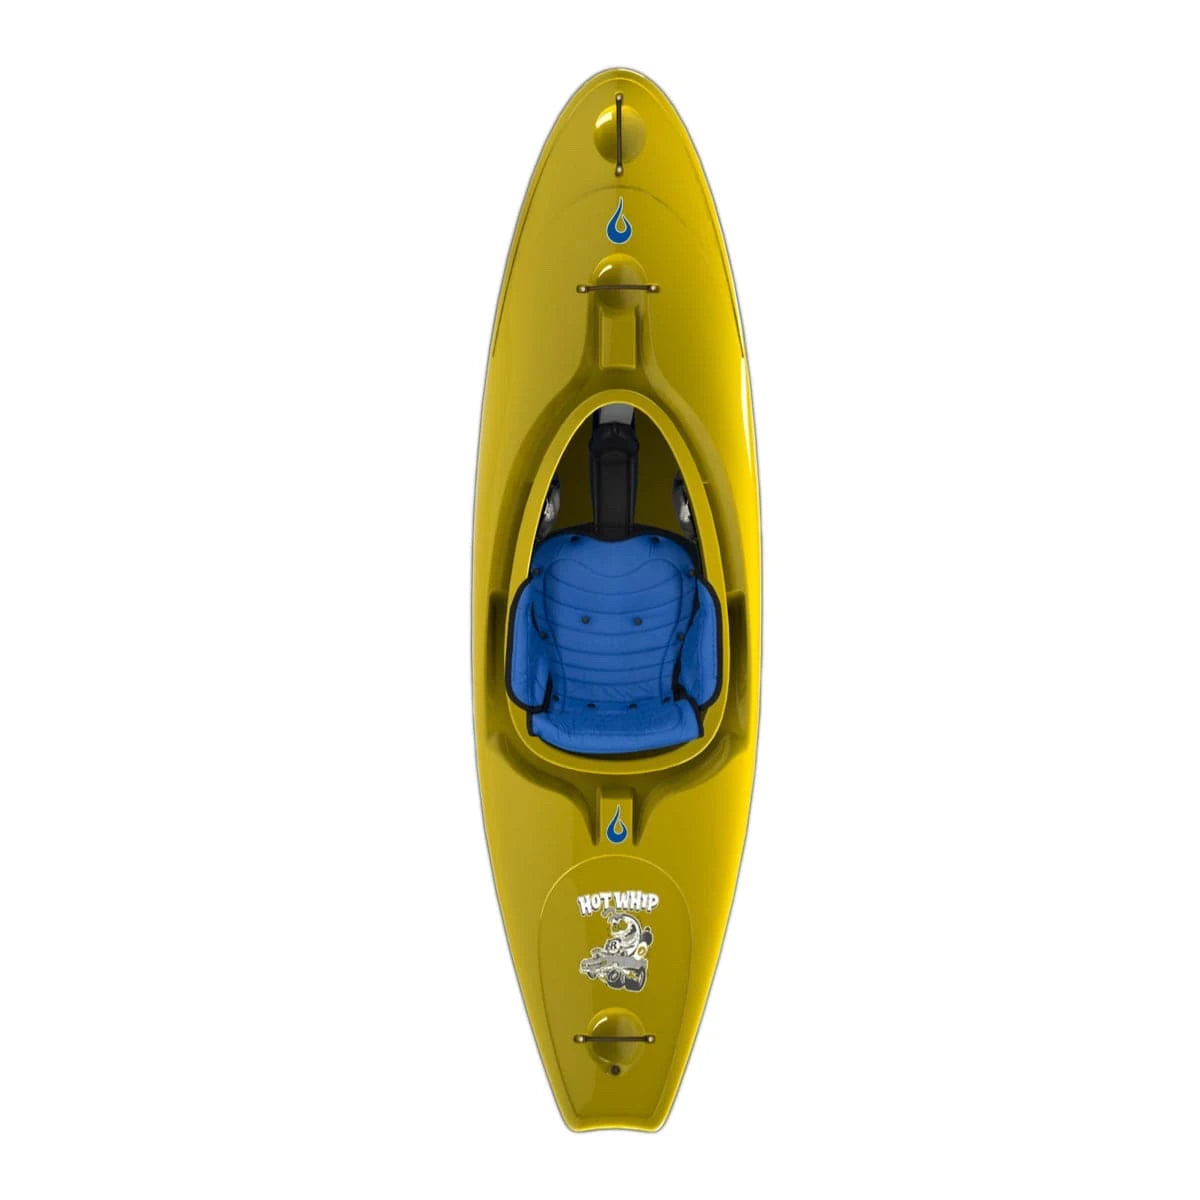 A yellow LiquidLogic Hot Whip kayak with a blue seat on a white background.